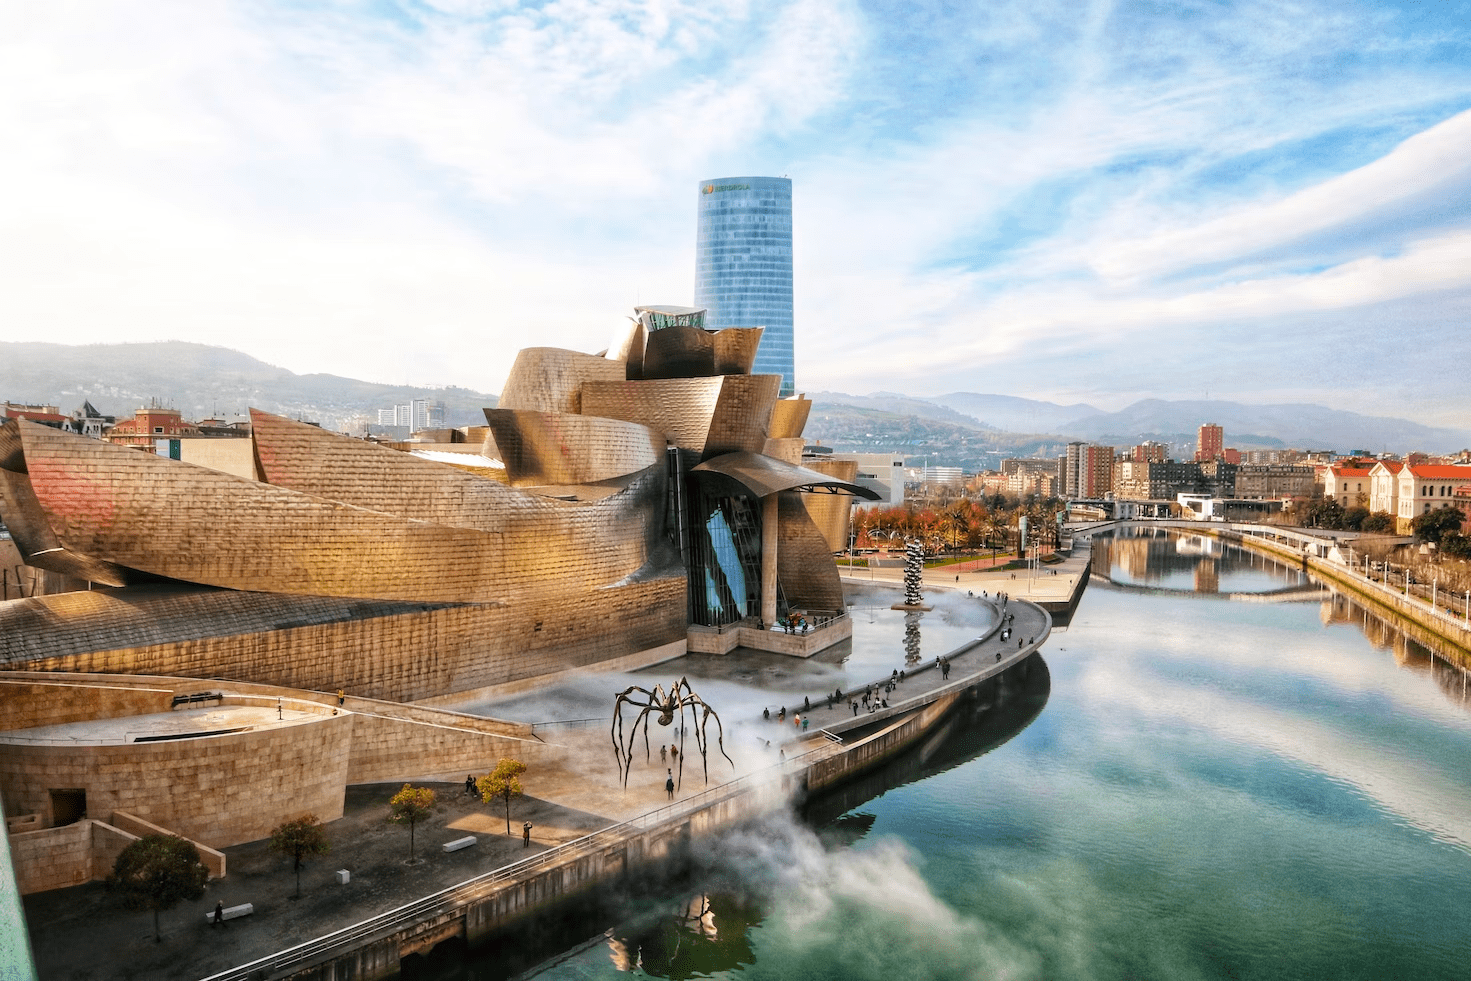 Best city to go in Spain for culture